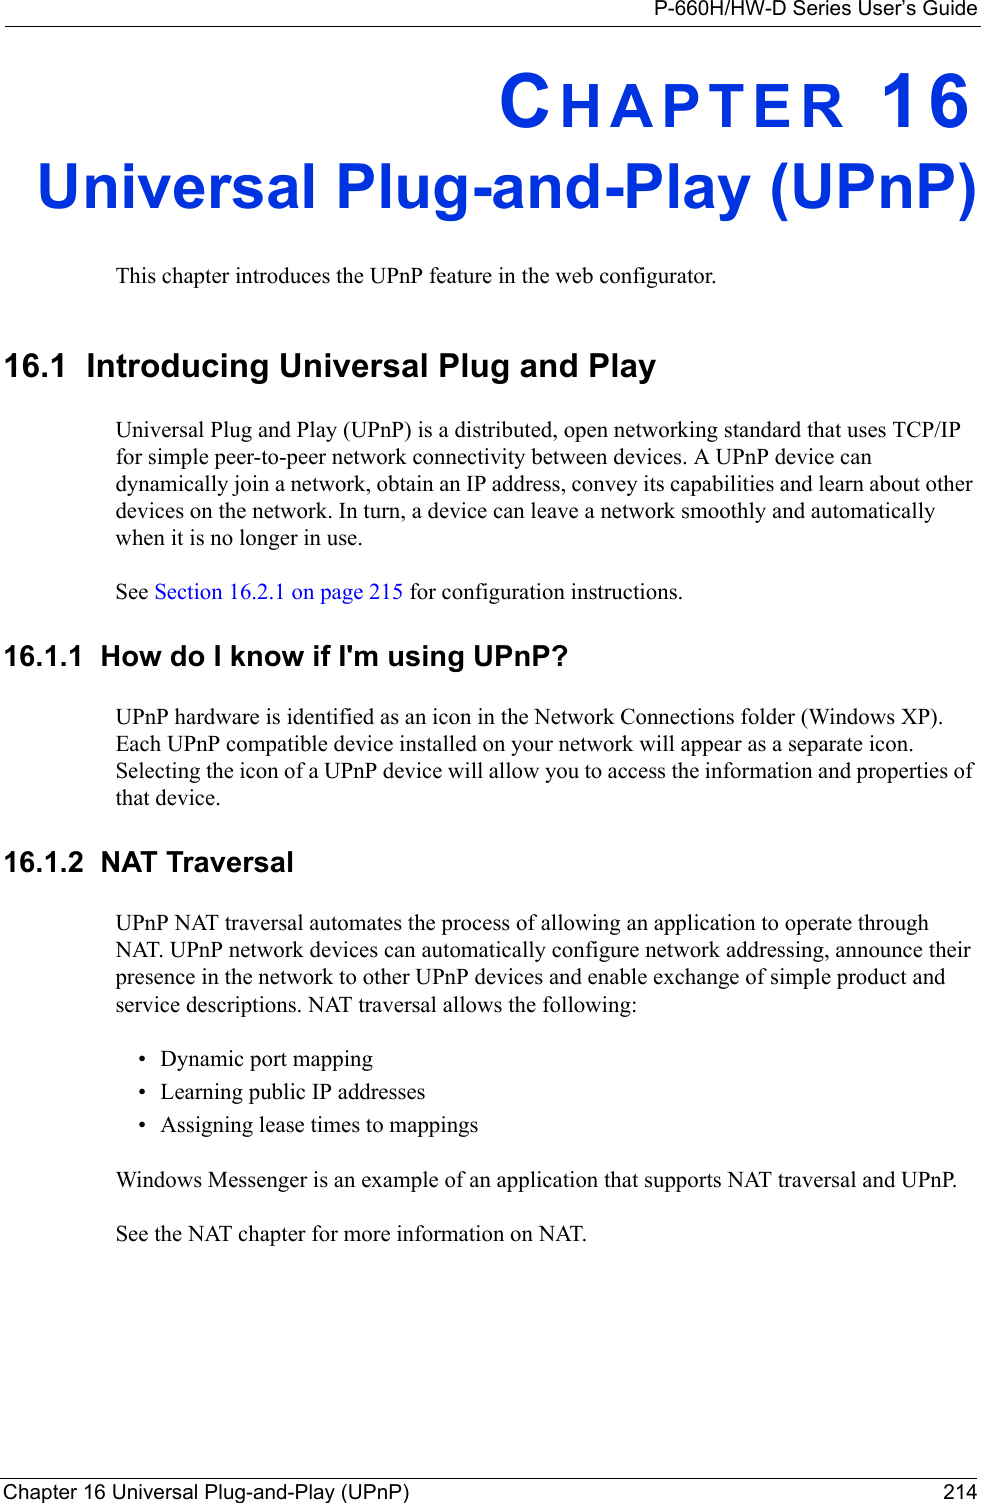 P-660H/HW-D Series User’s GuideChapter 16 Universal Plug-and-Play (UPnP) 214CHAPTER 16Universal Plug-and-Play (UPnP)This chapter introduces the UPnP feature in the web configurator.16.1  Introducing Universal Plug and Play Universal Plug and Play (UPnP) is a distributed, open networking standard that uses TCP/IP for simple peer-to-peer network connectivity between devices. A UPnP device can dynamically join a network, obtain an IP address, convey its capabilities and learn about other devices on the network. In turn, a device can leave a network smoothly and automatically when it is no longer in use.See Section 16.2.1 on page 215 for configuration instructions. 16.1.1  How do I know if I&apos;m using UPnP? UPnP hardware is identified as an icon in the Network Connections folder (Windows XP). Each UPnP compatible device installed on your network will appear as a separate icon. Selecting the icon of a UPnP device will allow you to access the information and properties of that device. 16.1.2  NAT TraversalUPnP NAT traversal automates the process of allowing an application to operate through NAT. UPnP network devices can automatically configure network addressing, announce their presence in the network to other UPnP devices and enable exchange of simple product and service descriptions. NAT traversal allows the following:• Dynamic port mapping• Learning public IP addresses• Assigning lease times to mappingsWindows Messenger is an example of an application that supports NAT traversal and UPnP. See the NAT chapter for more information on NAT.